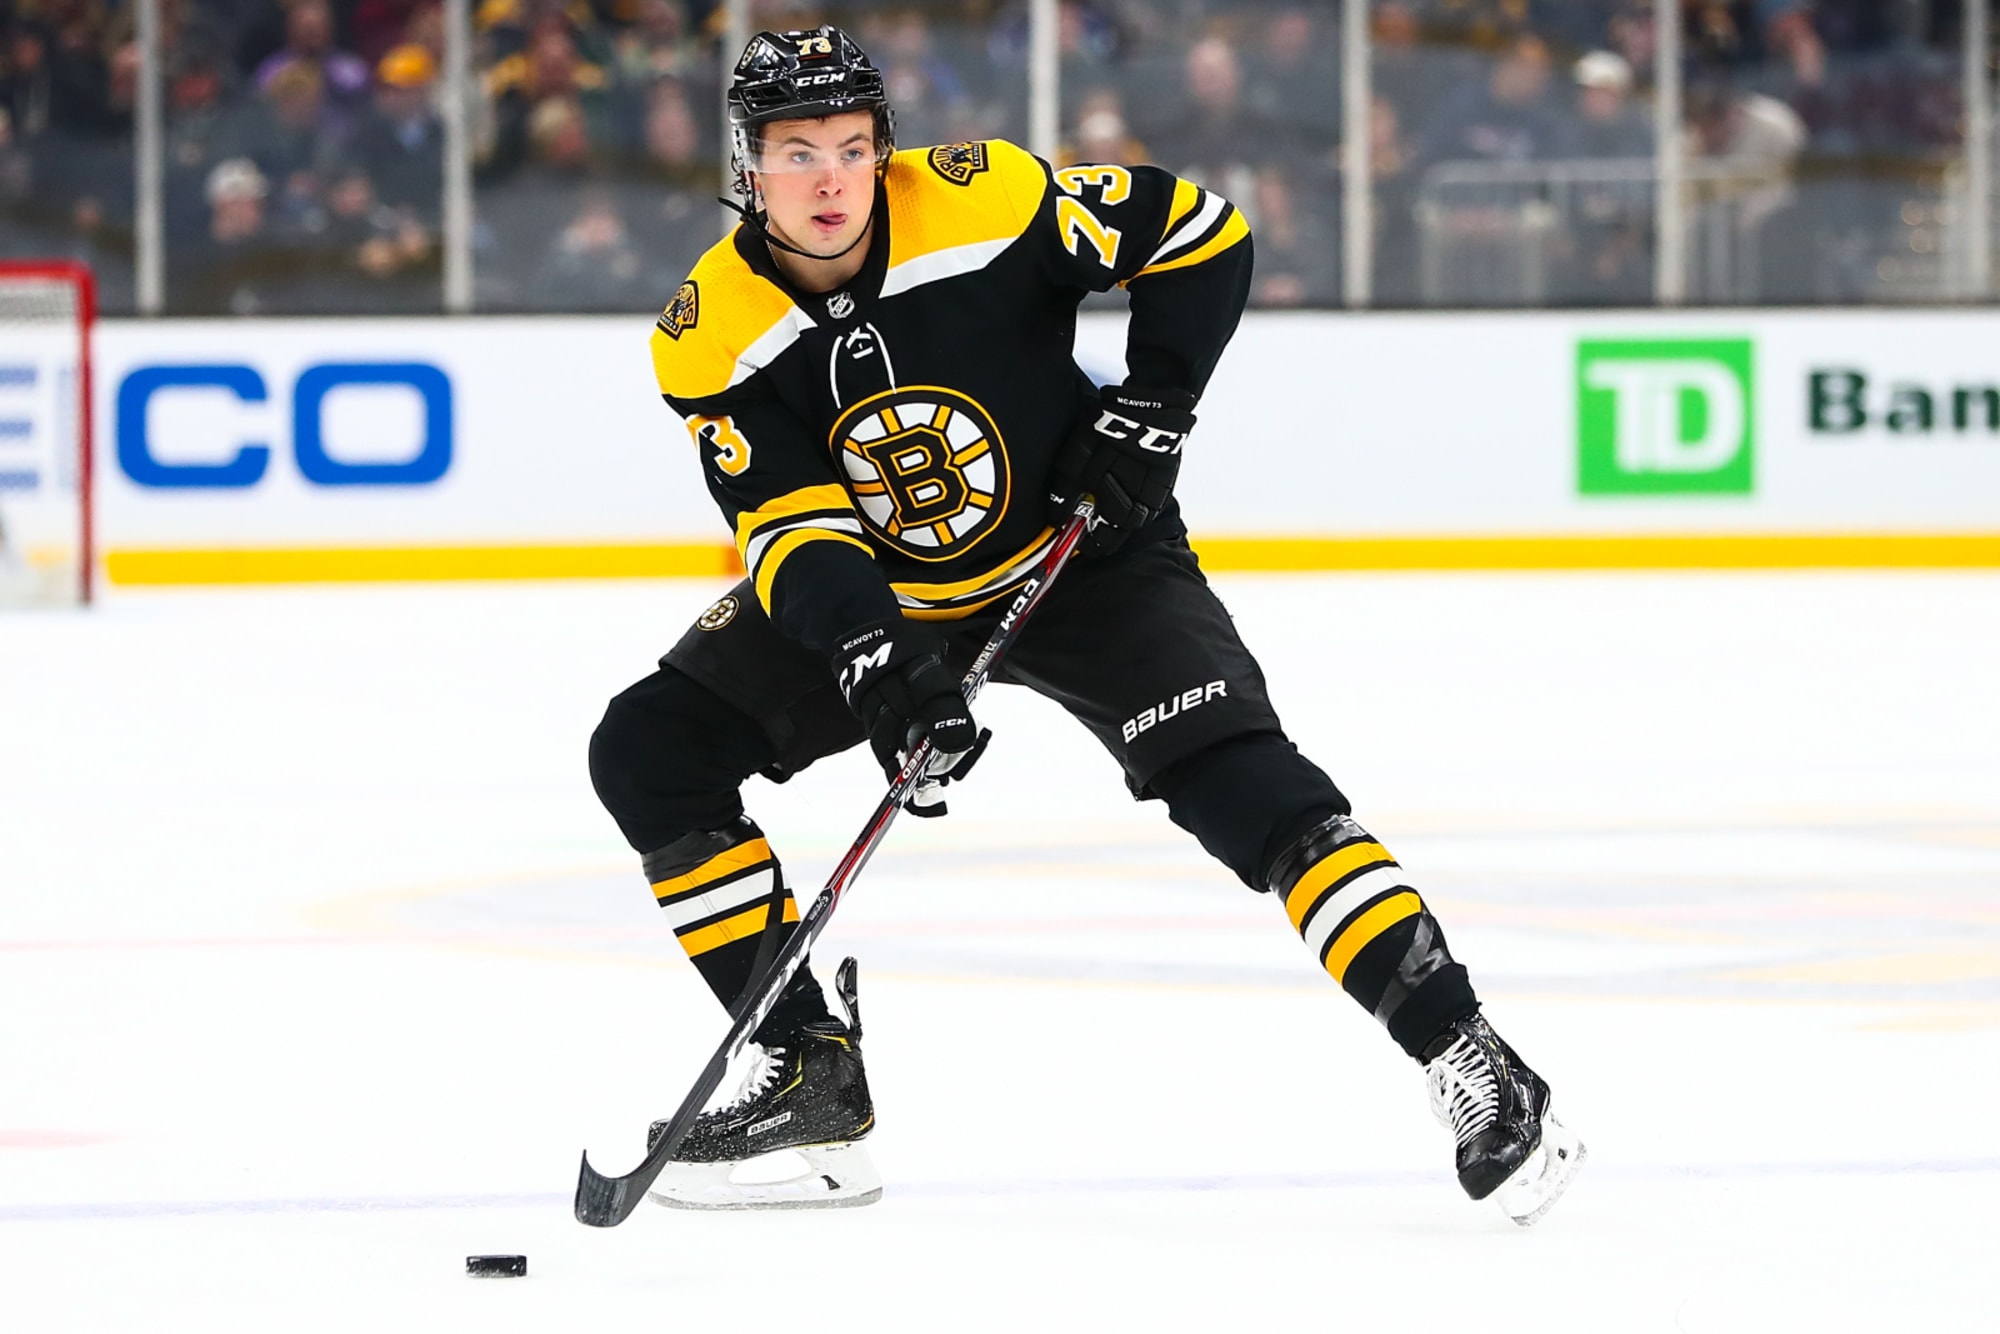 Top pick McAvoy joins Providence